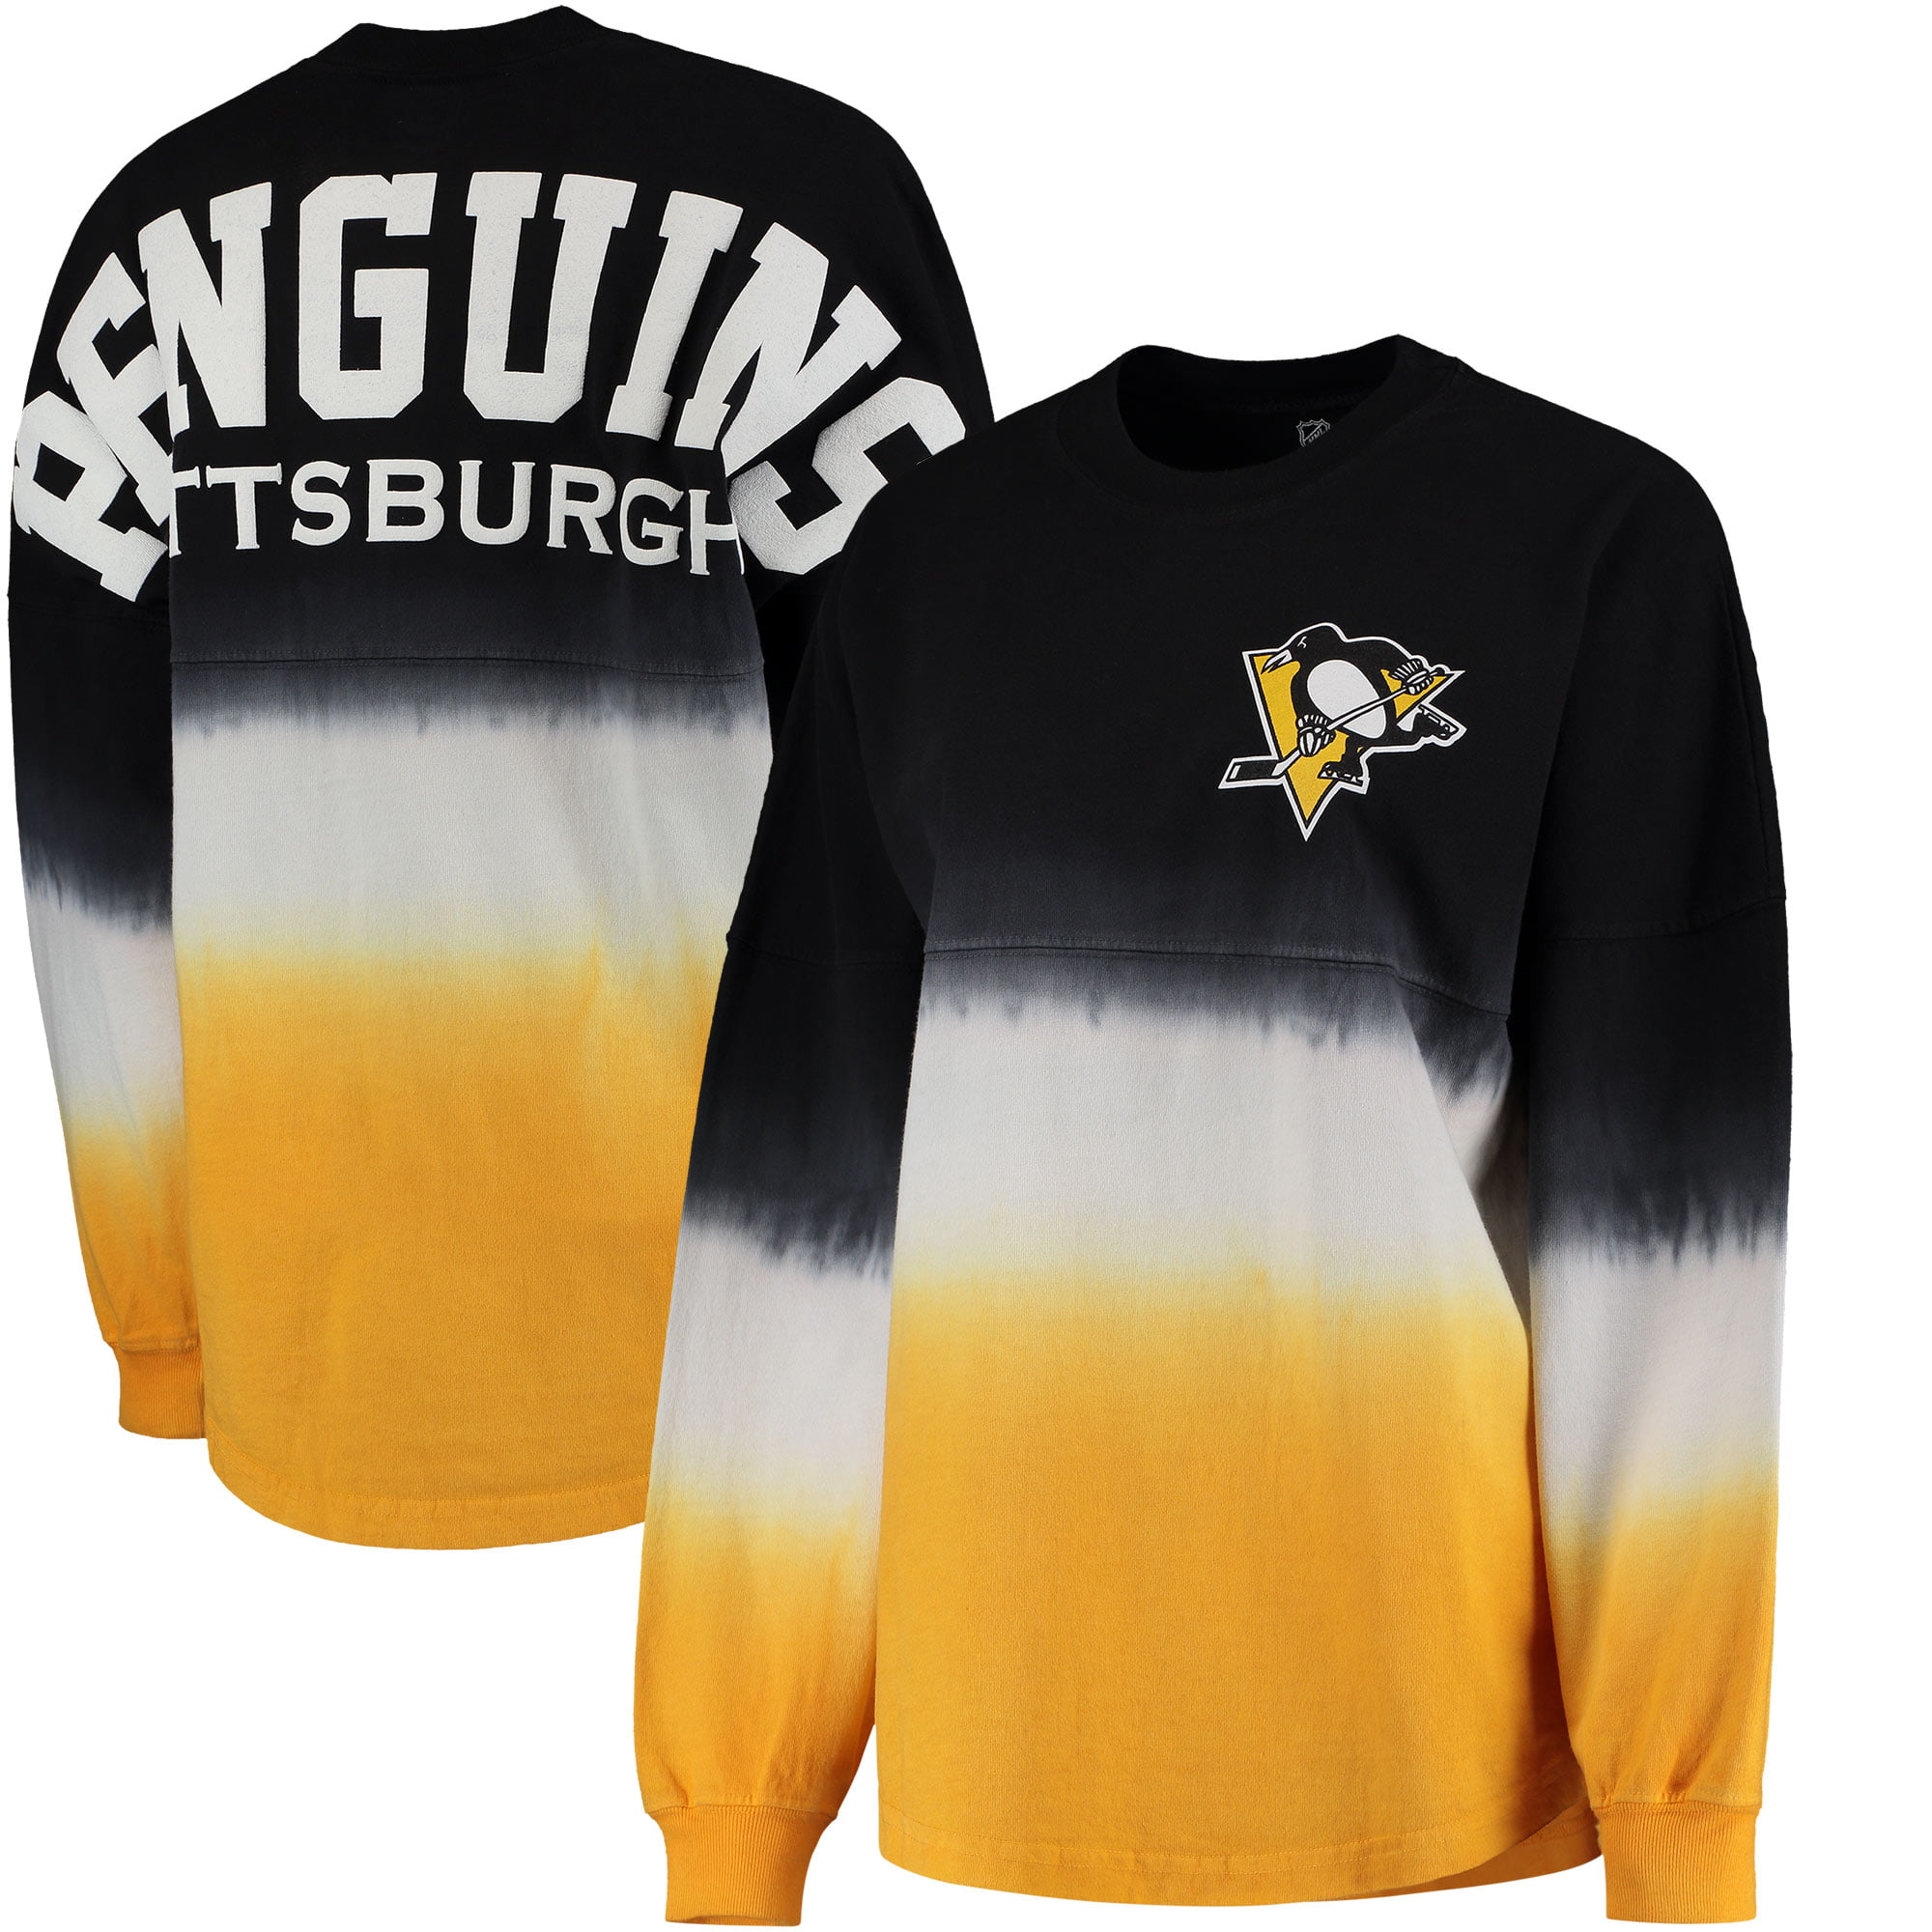 pittsburgh penguins womens jersey